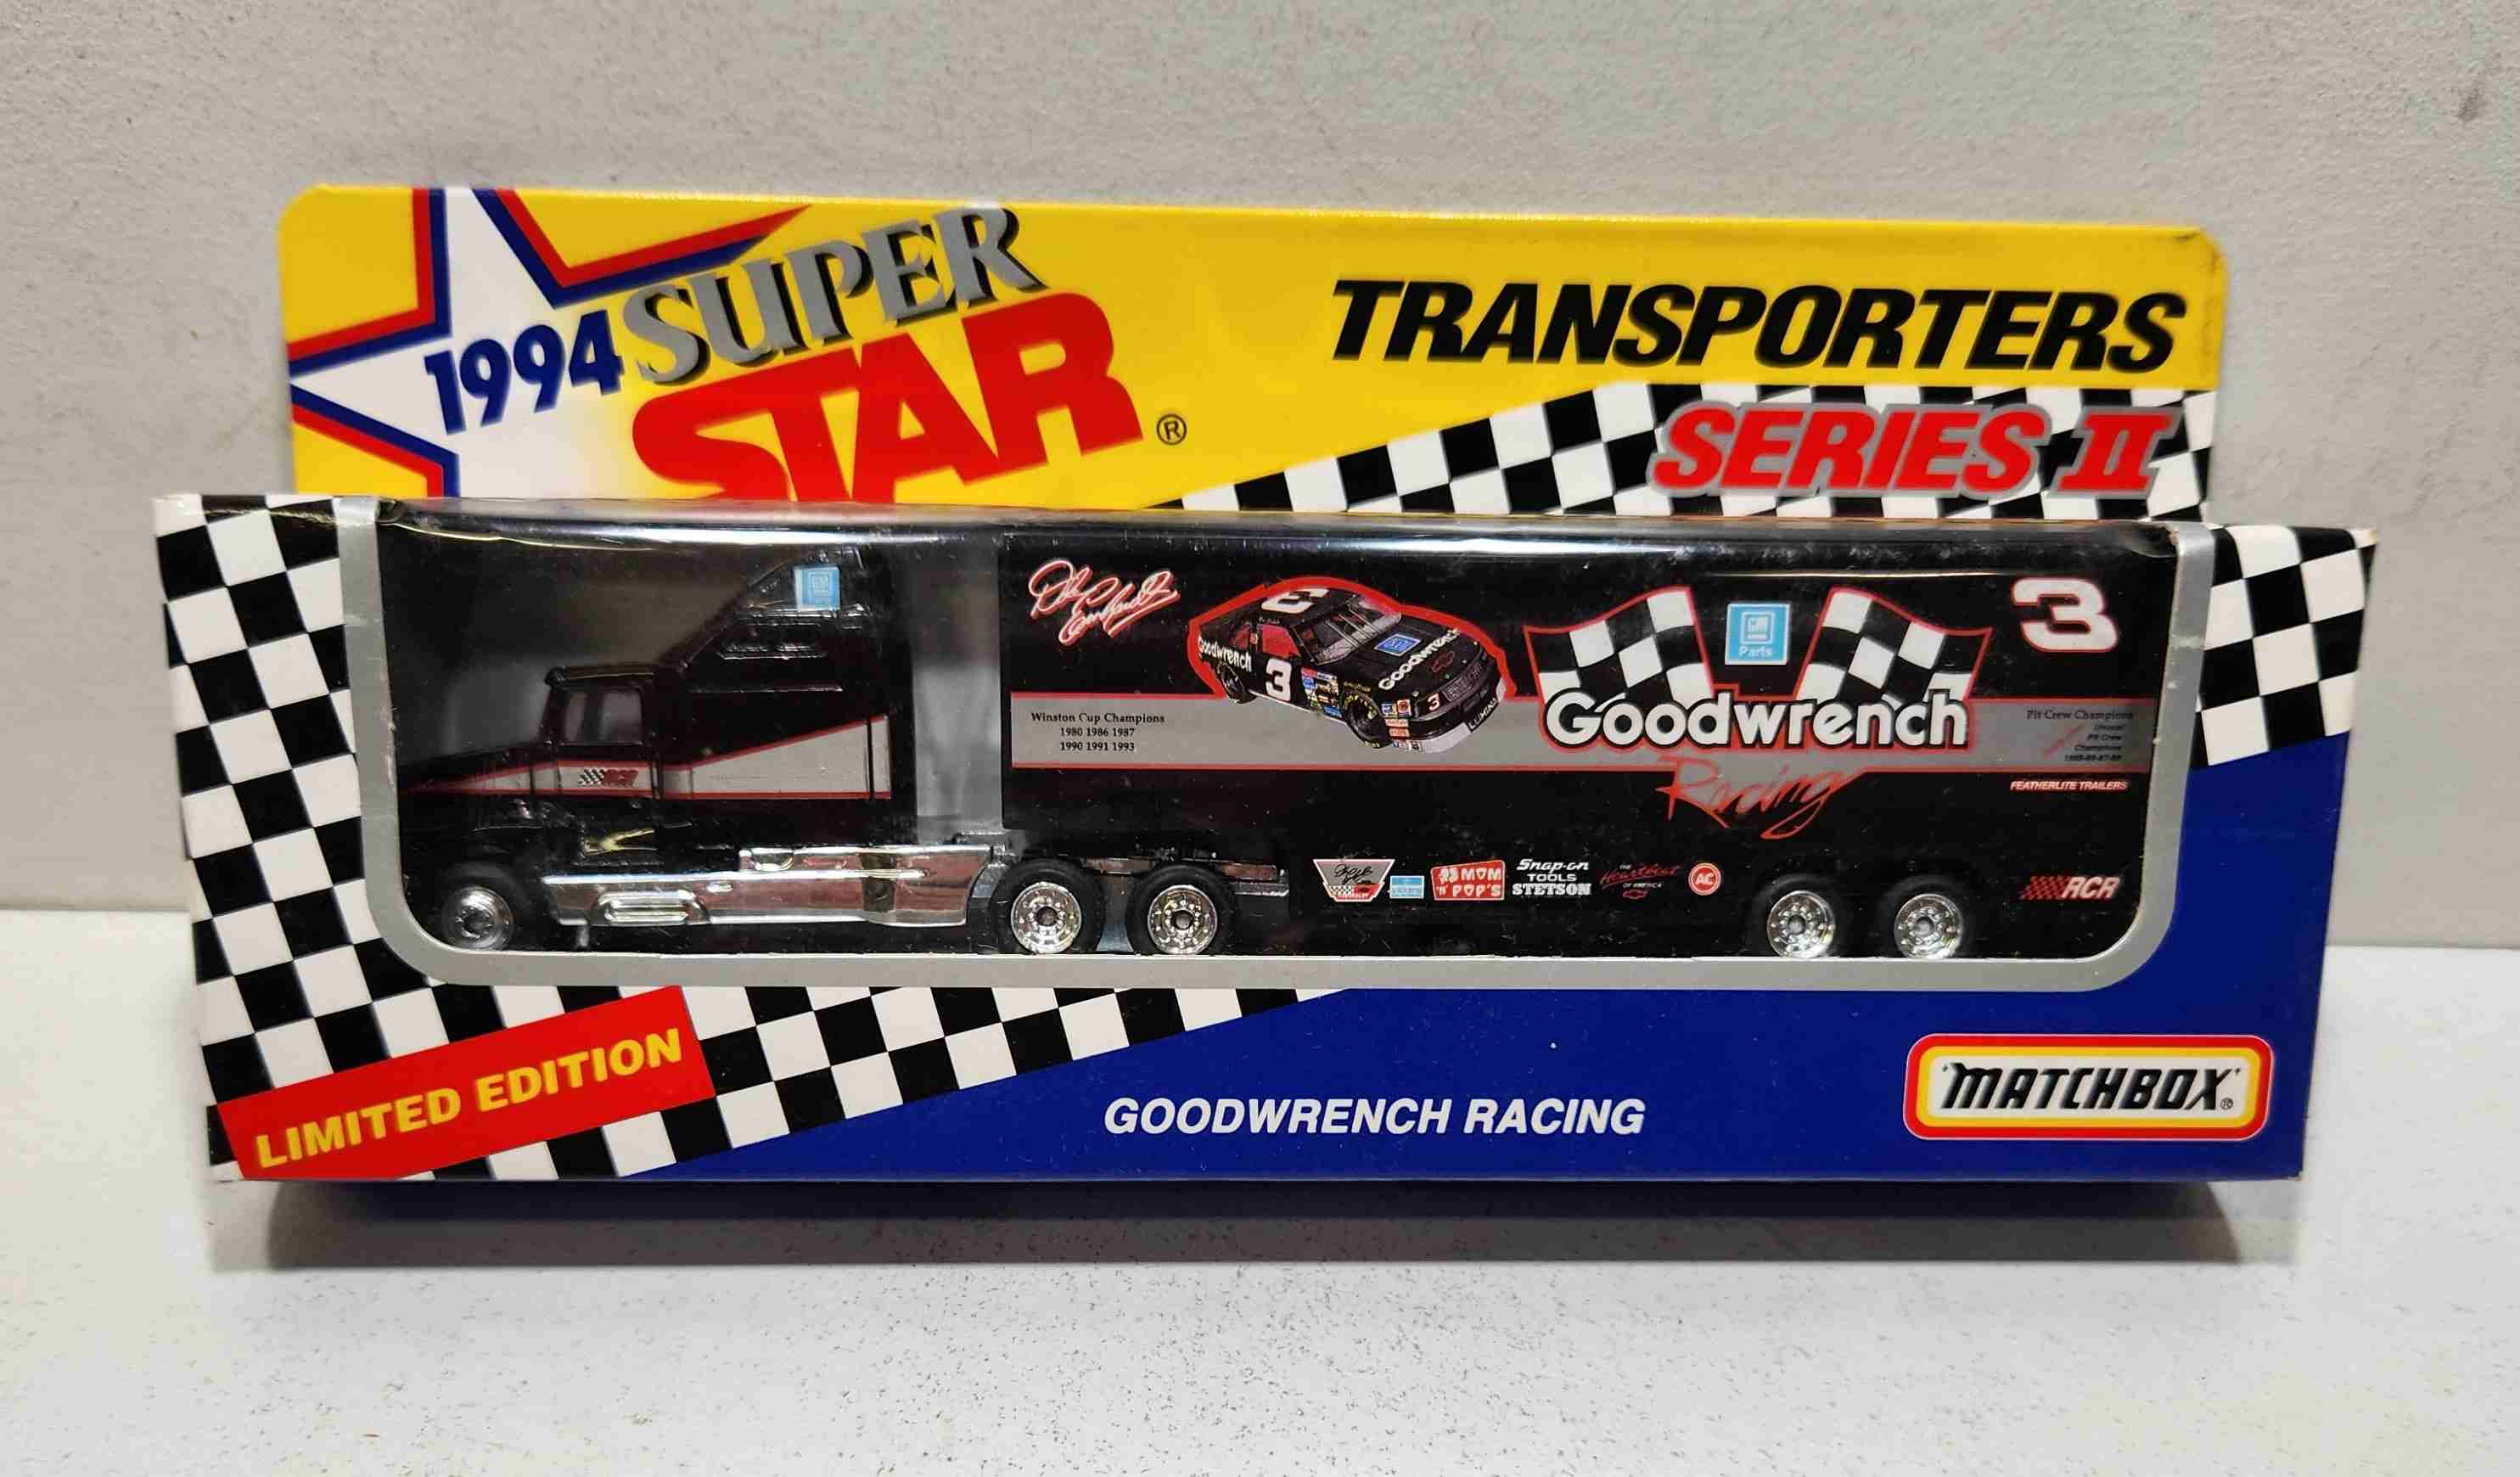 1994 Dale Earnhardt 1/80th Goodwrench Transporter